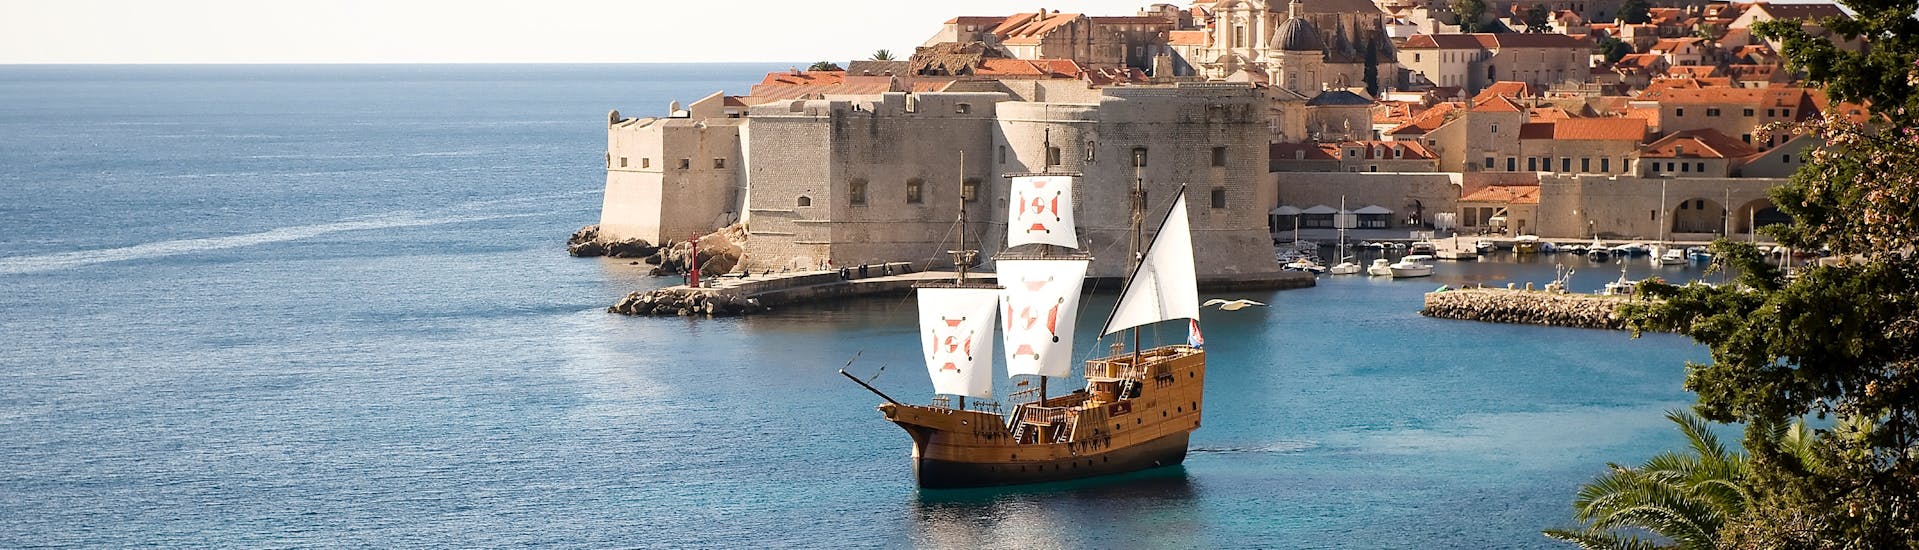 The traditional Karaka ship on the water during the boat trip around the Elaphiti Islands with Karaka Dubrovnik.